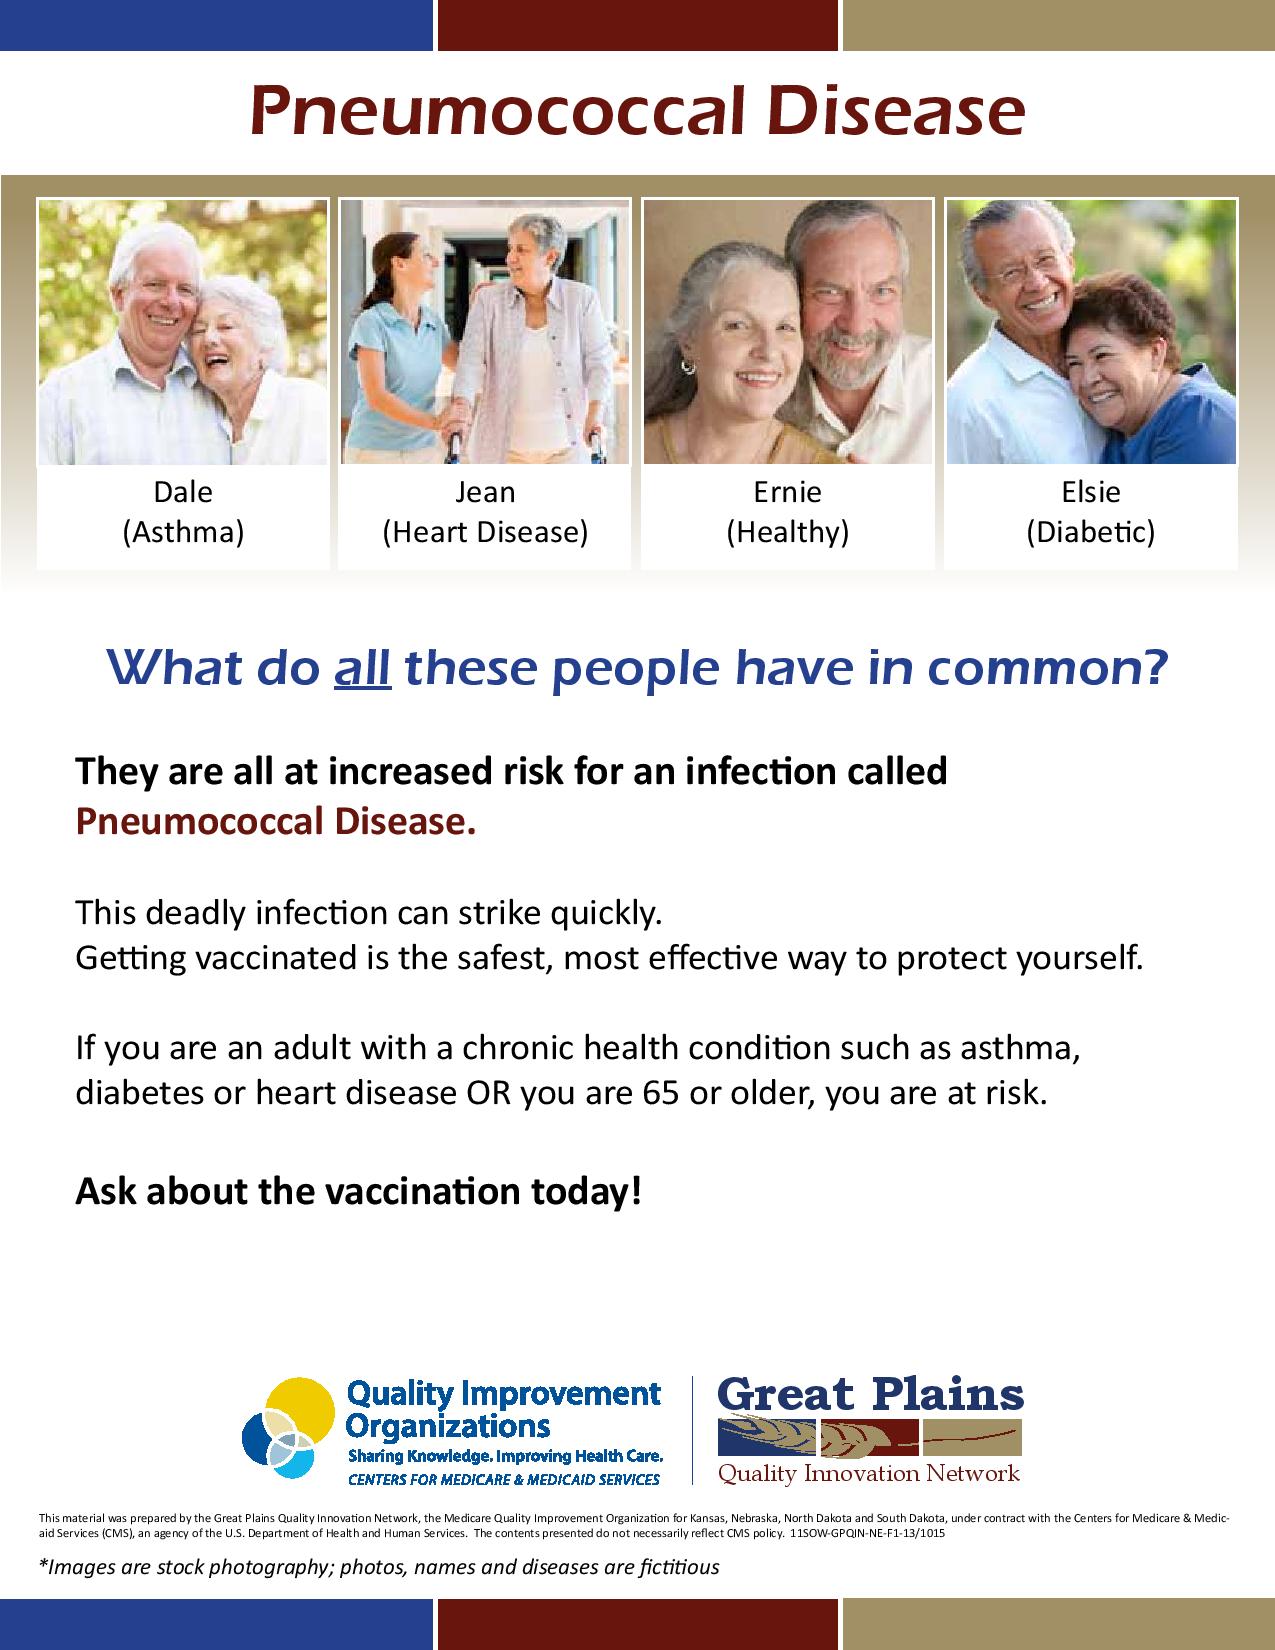 Pneumococcal Poster: What Do These People Have in Common